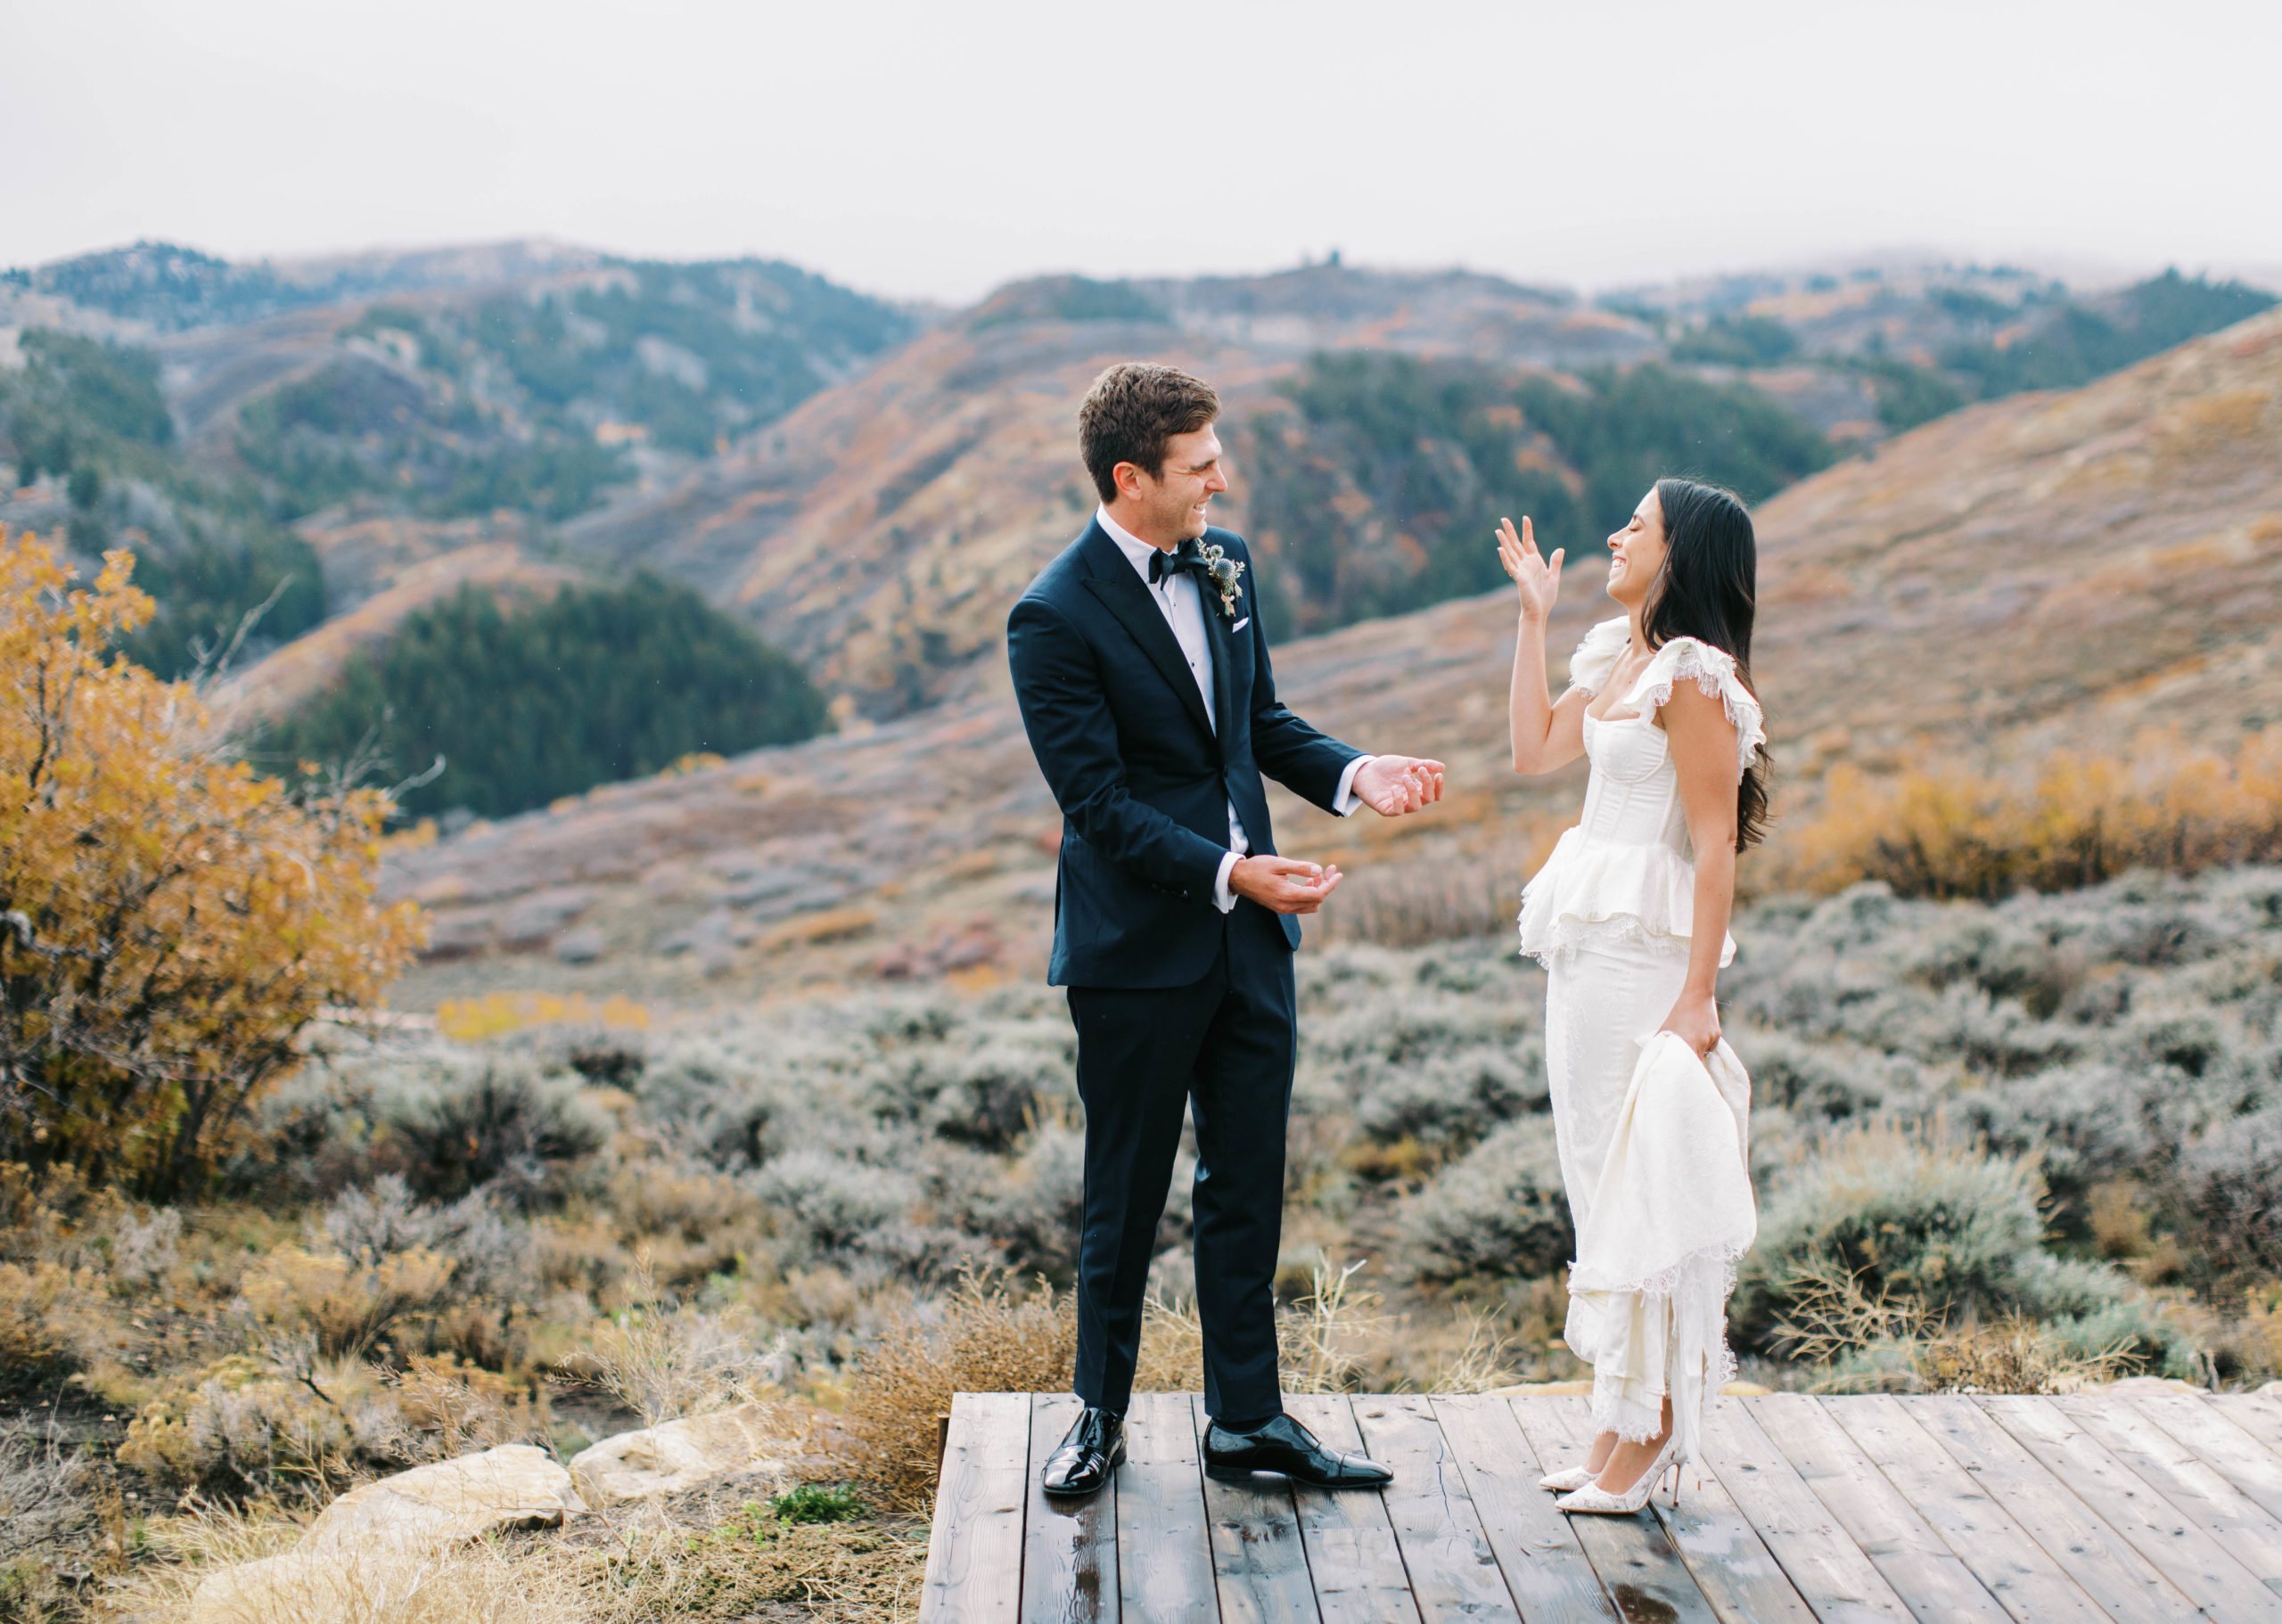 a bride and groom see each other for the first time on their wedding day. they laugh together with mountain views in the background. photo taken by megan robinson photography